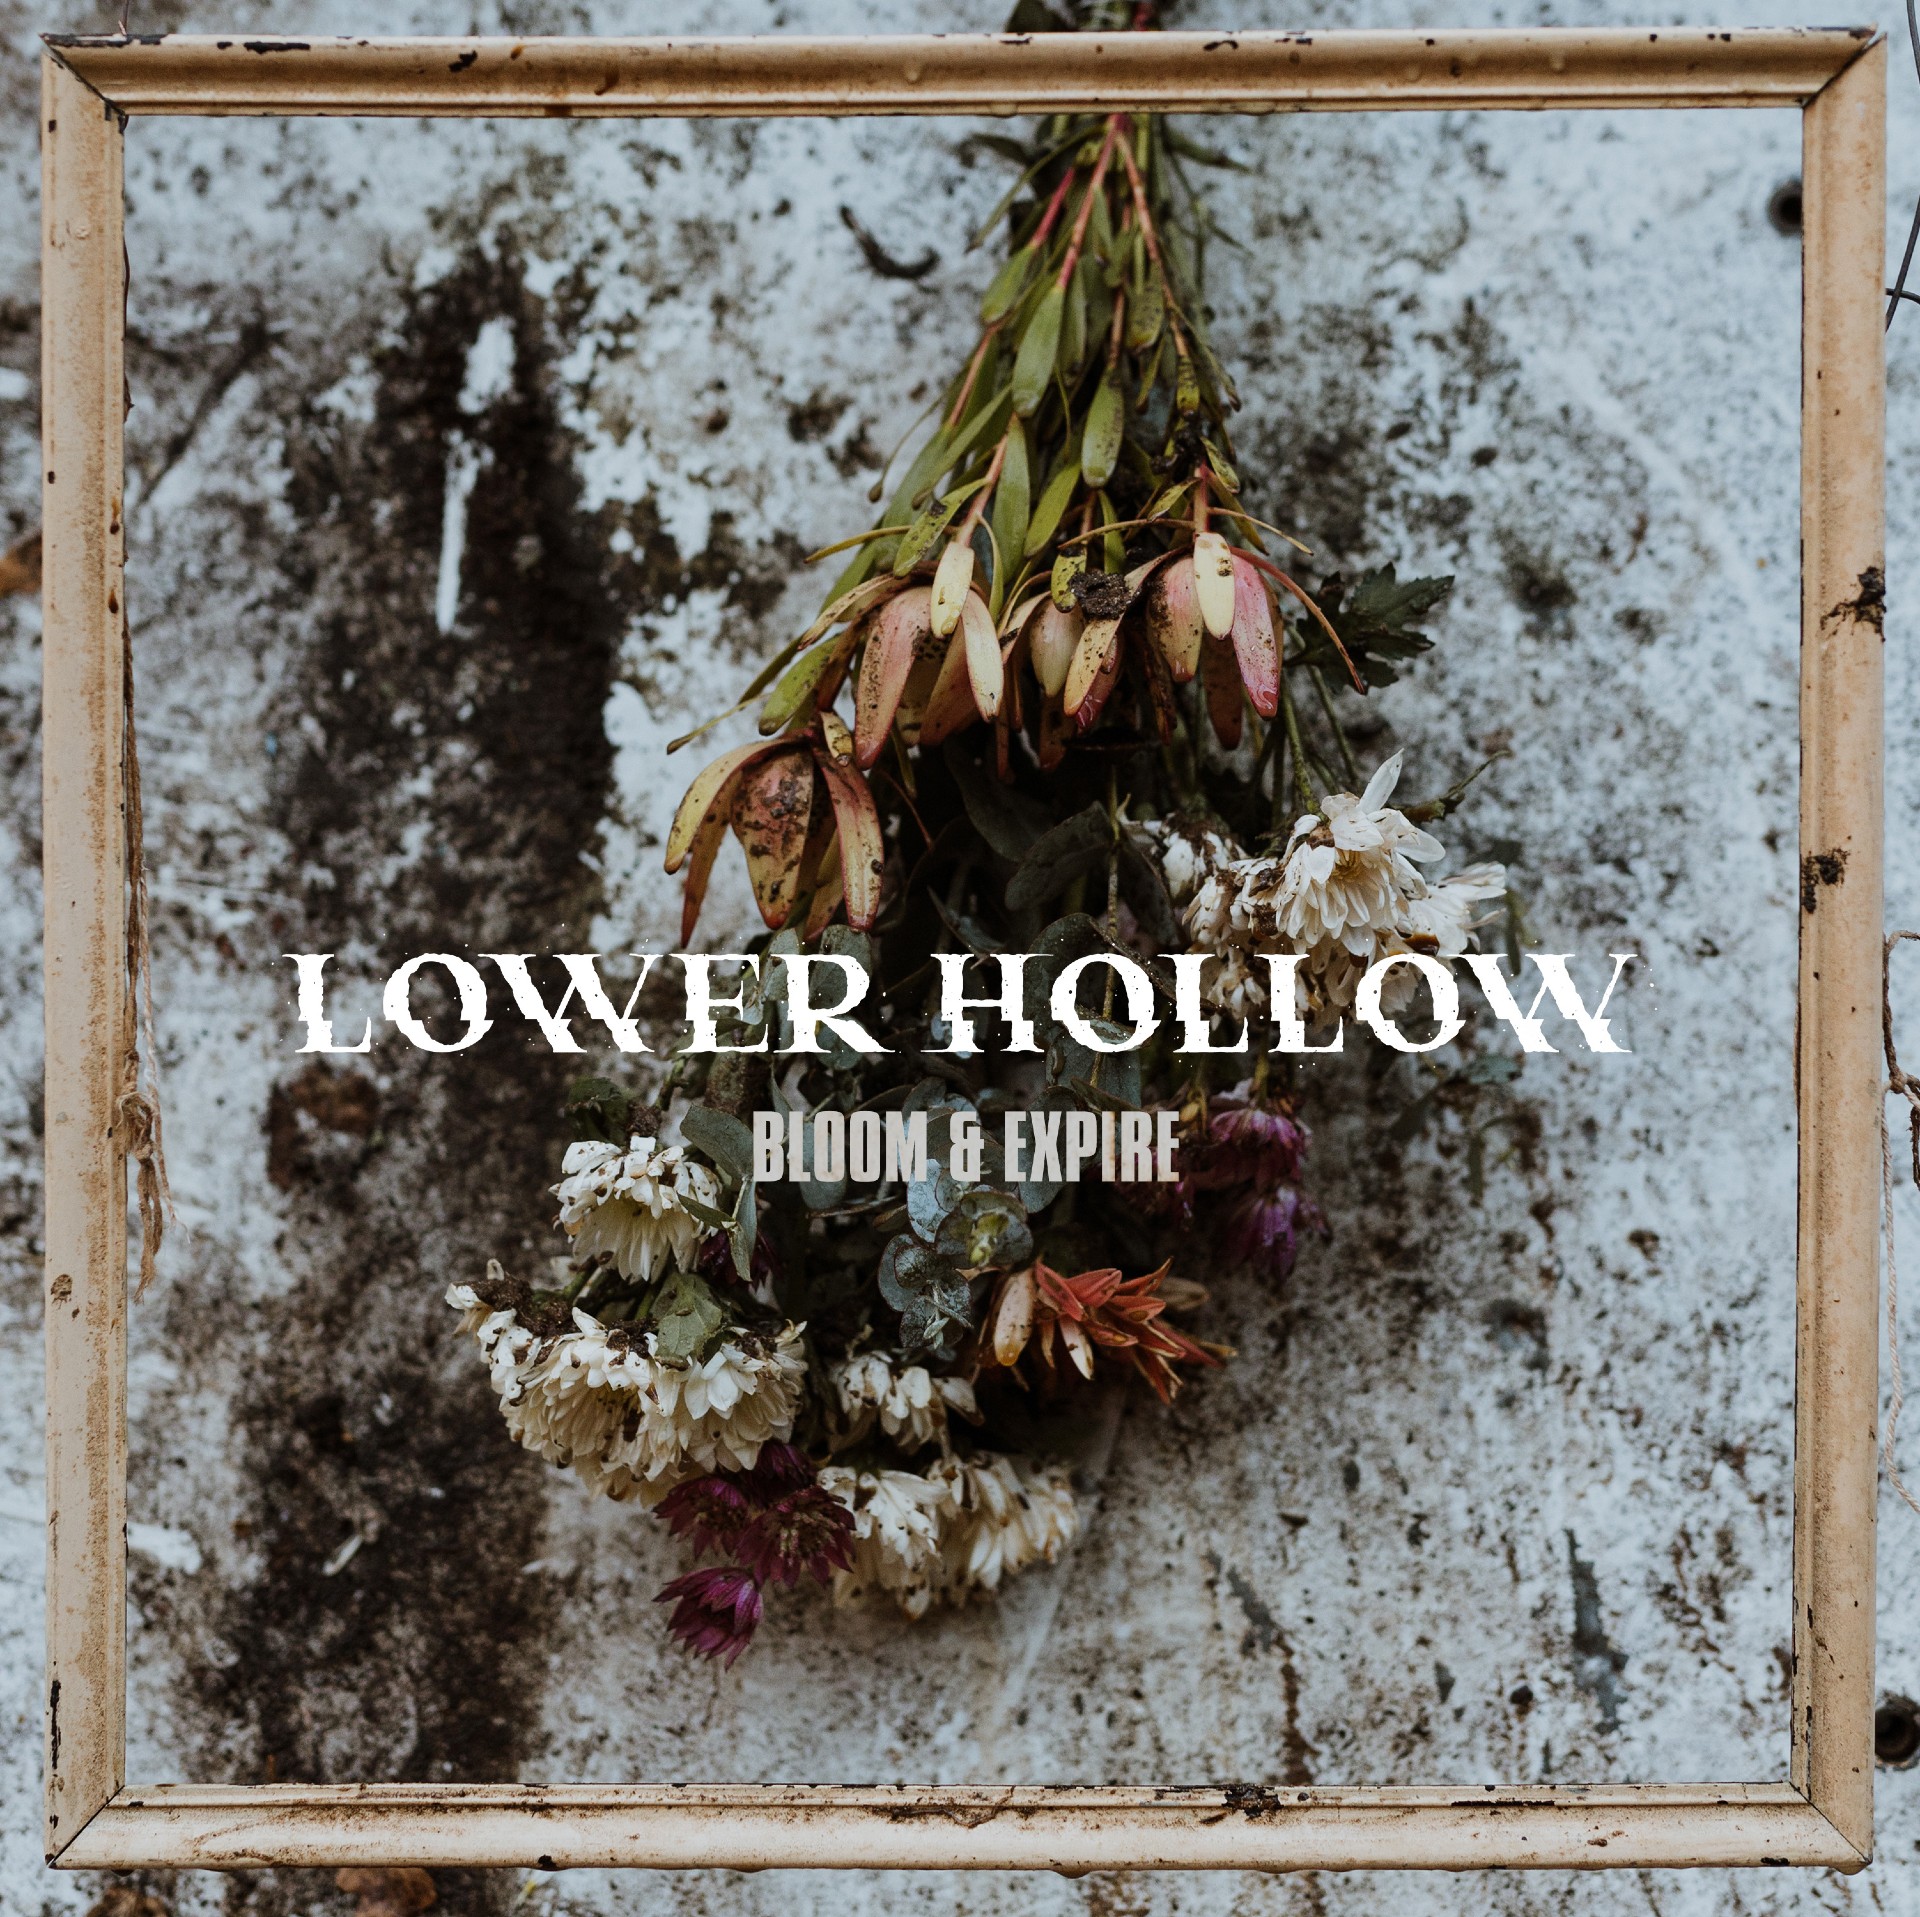 Artwork for the album ‘Bloom & Expire’ by Lower Hollow